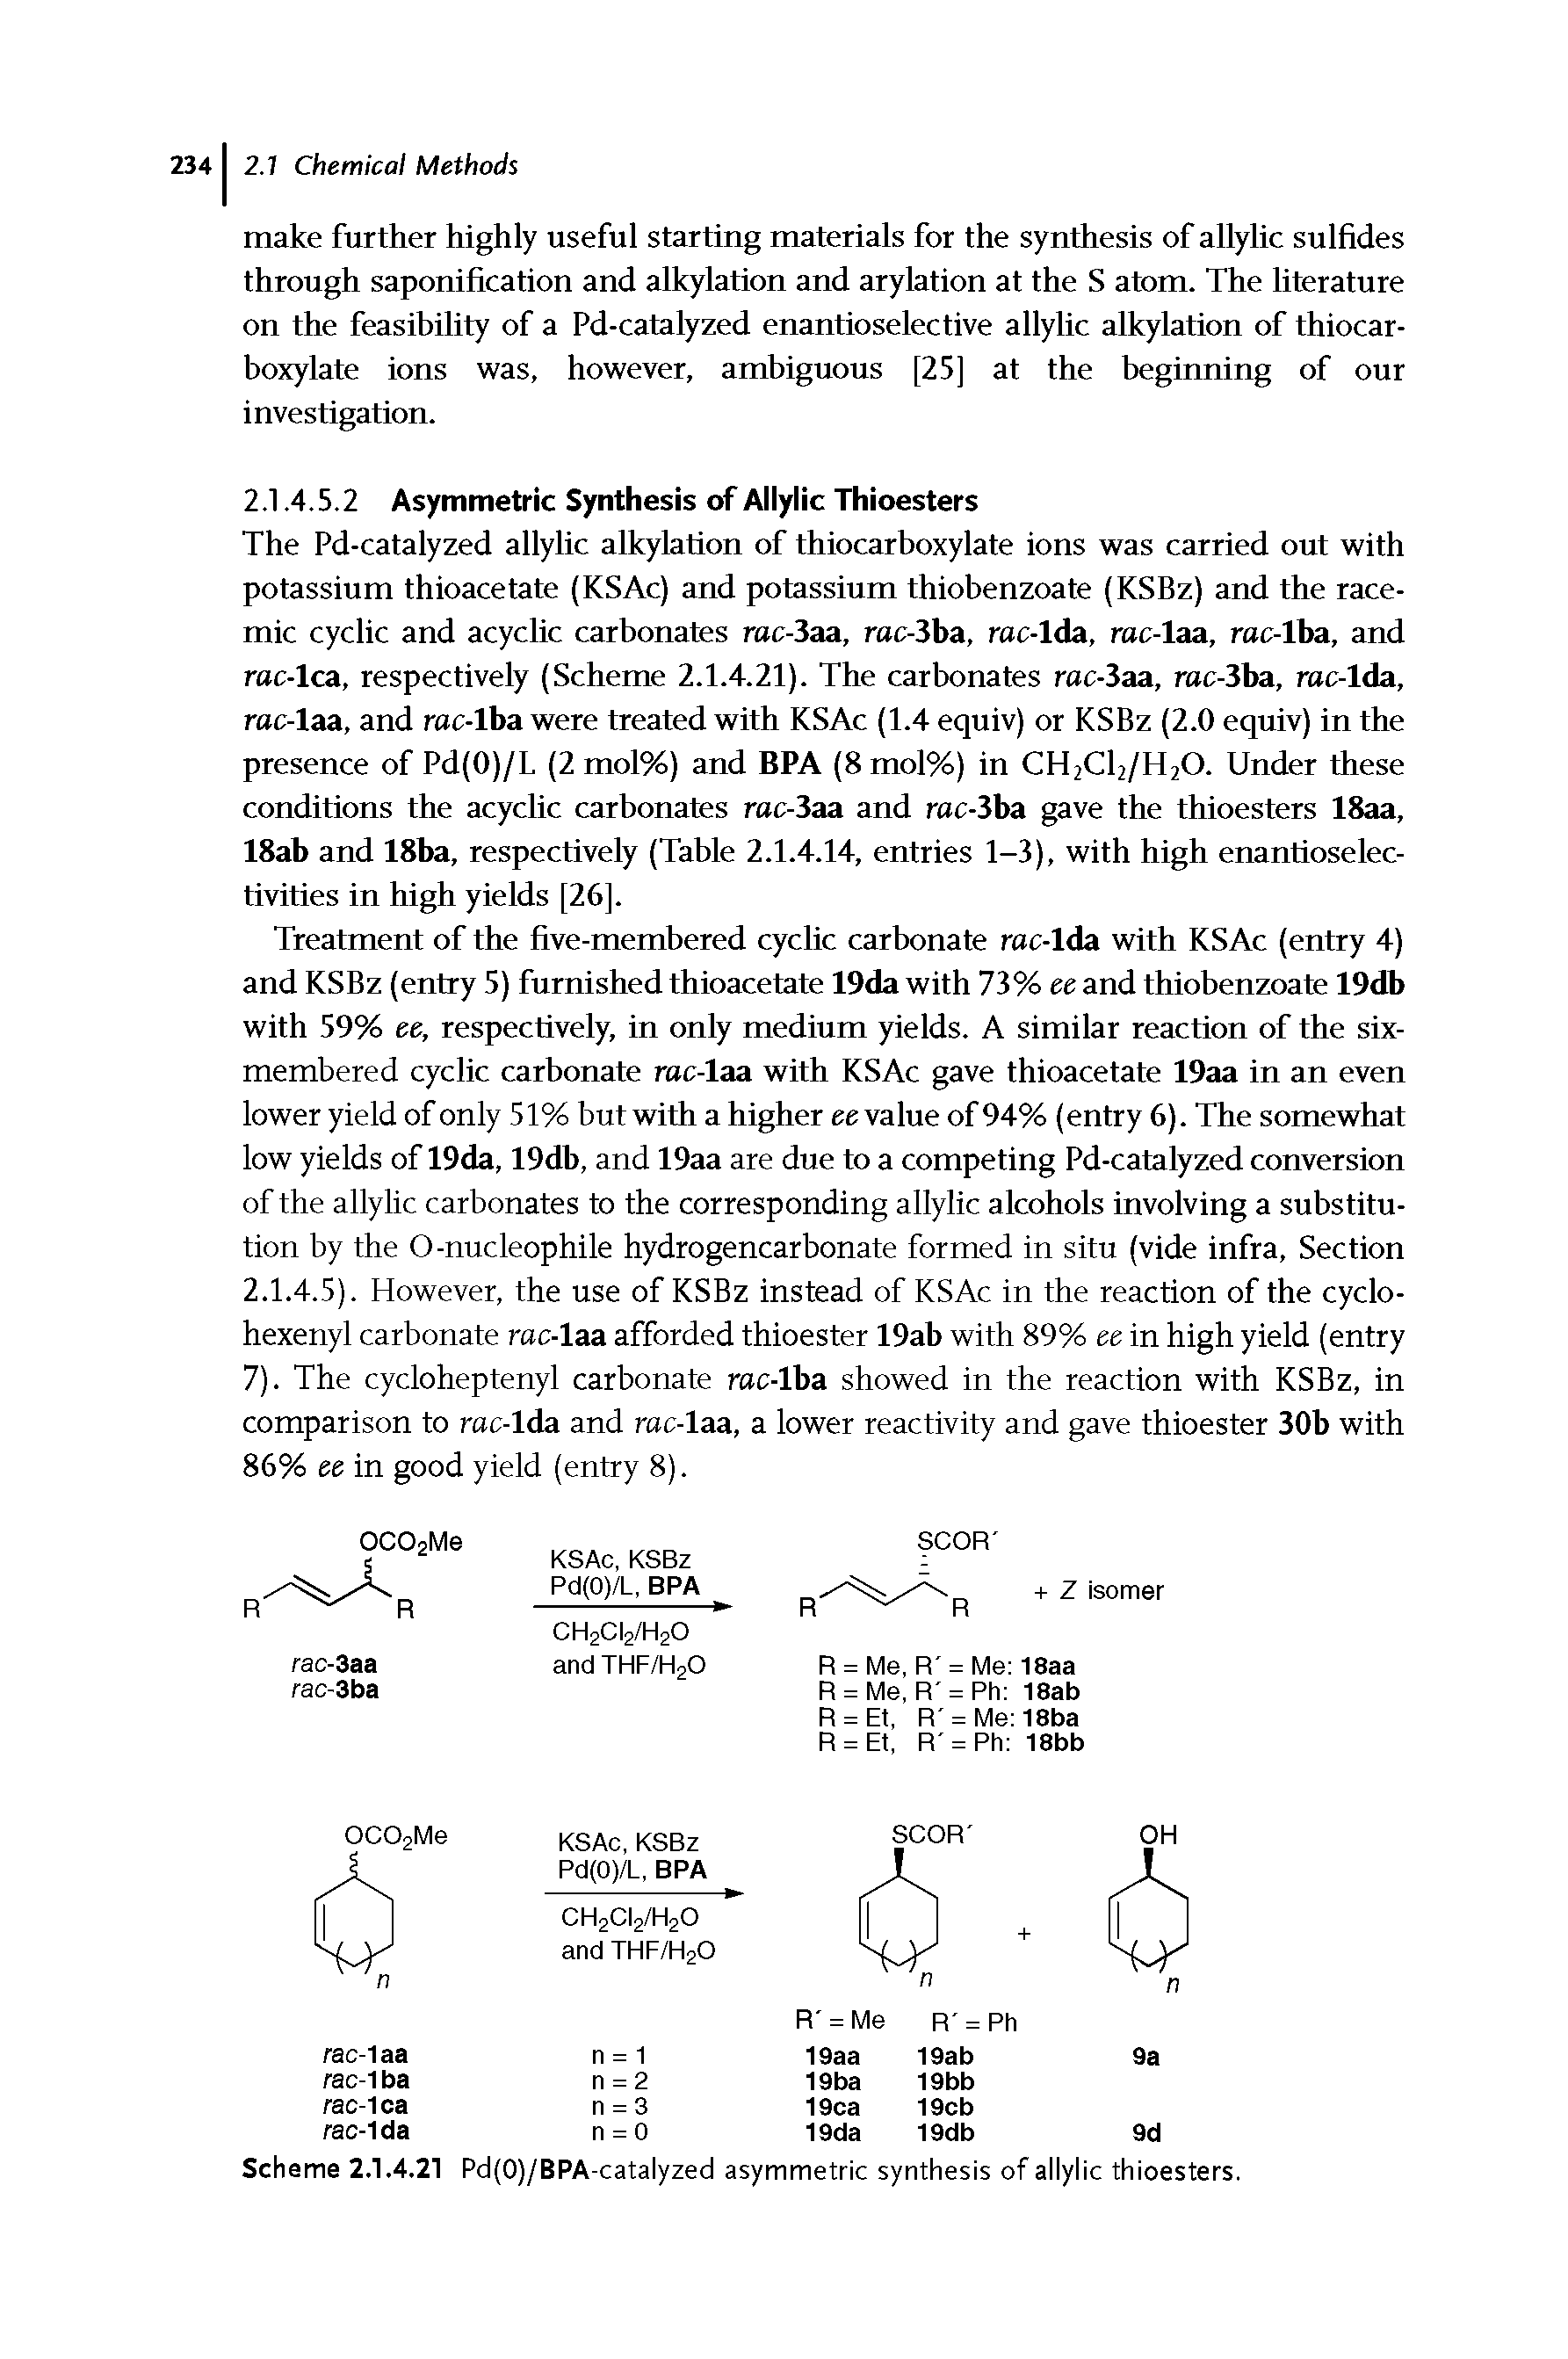 Scheme 2.1.4.21 Pd(0)/BPA-catalyzed asymmetric synthesis of allylic thioesters.